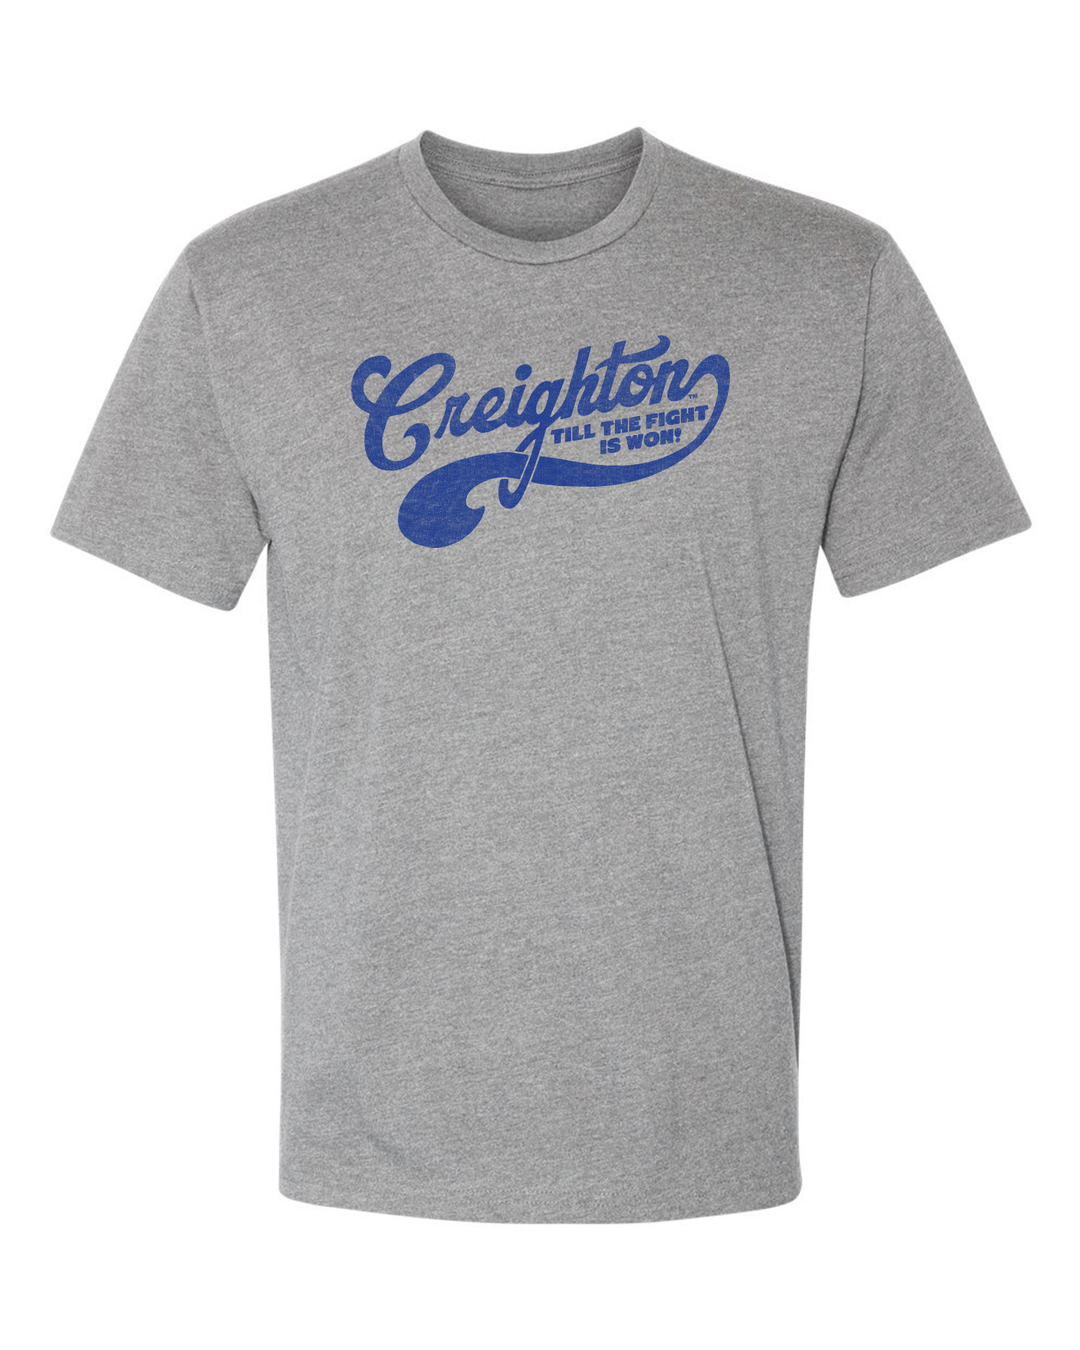 Vintage Grey Creighton T Shirt with Till the Fight is Won